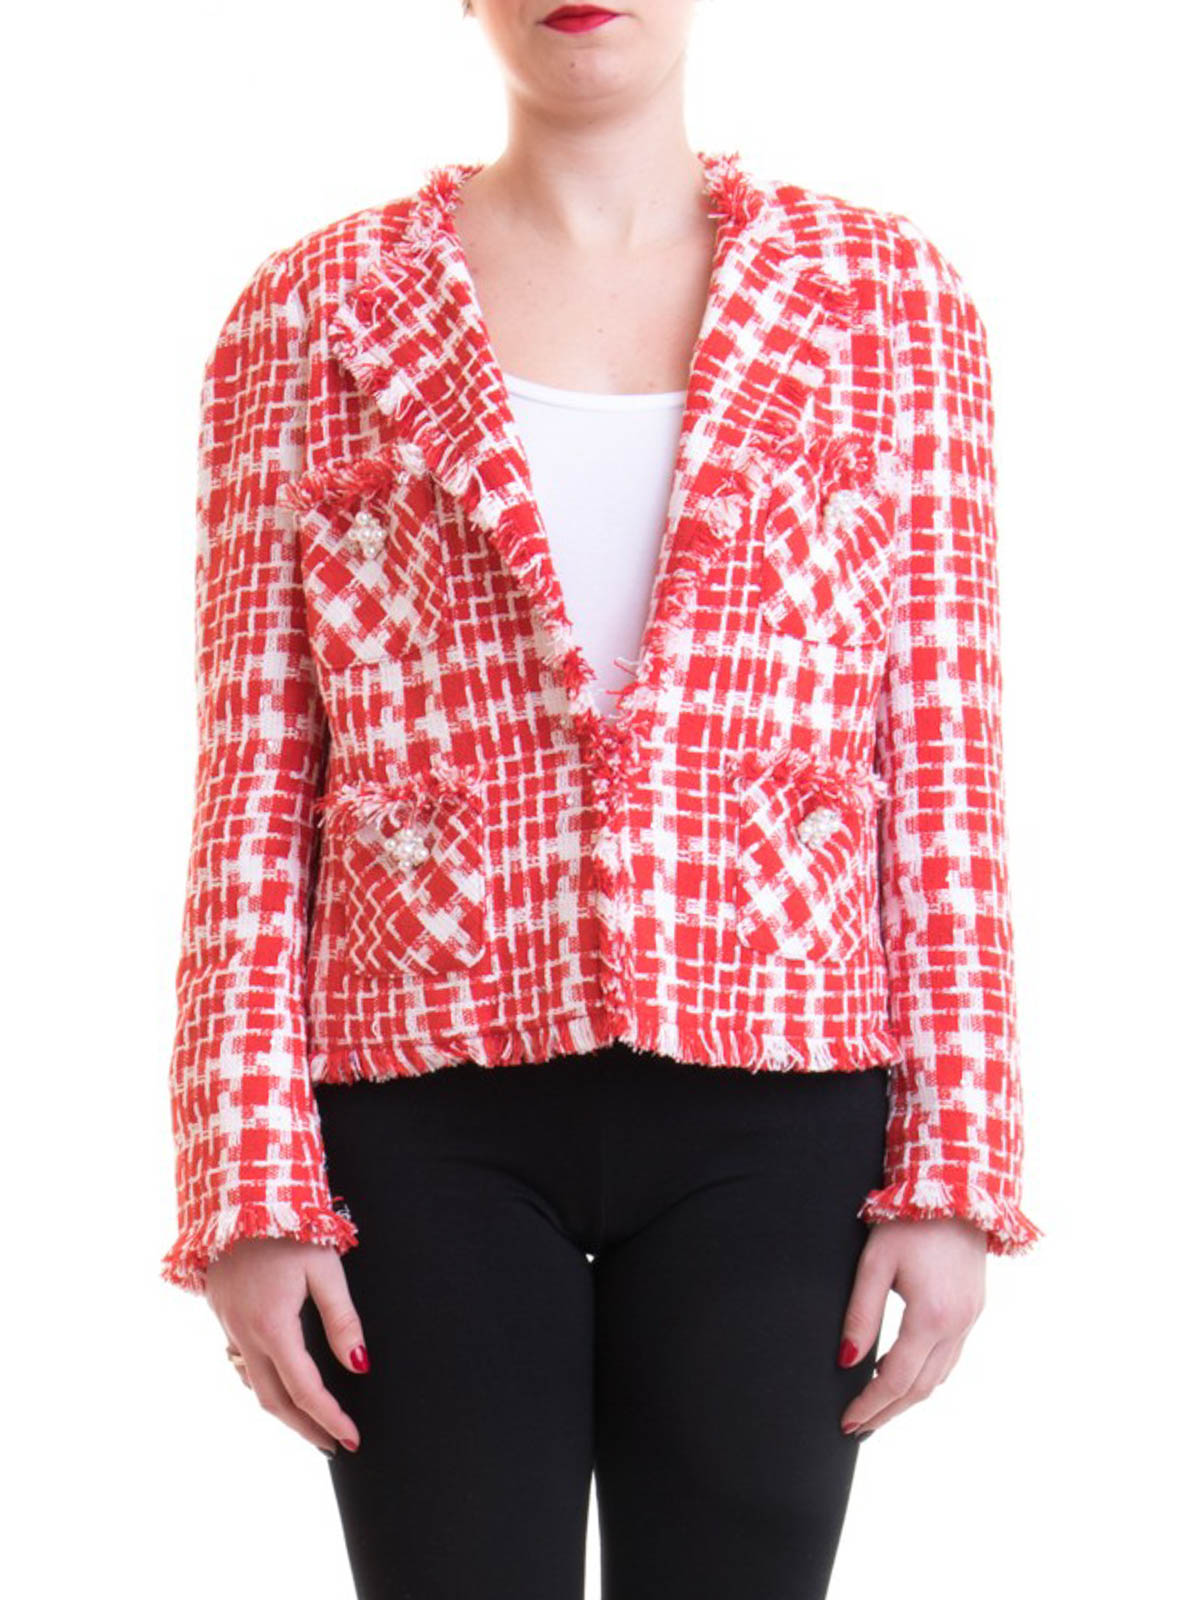 Chanel  Red Braided Trim Tweed Jacket  VSP Consignment